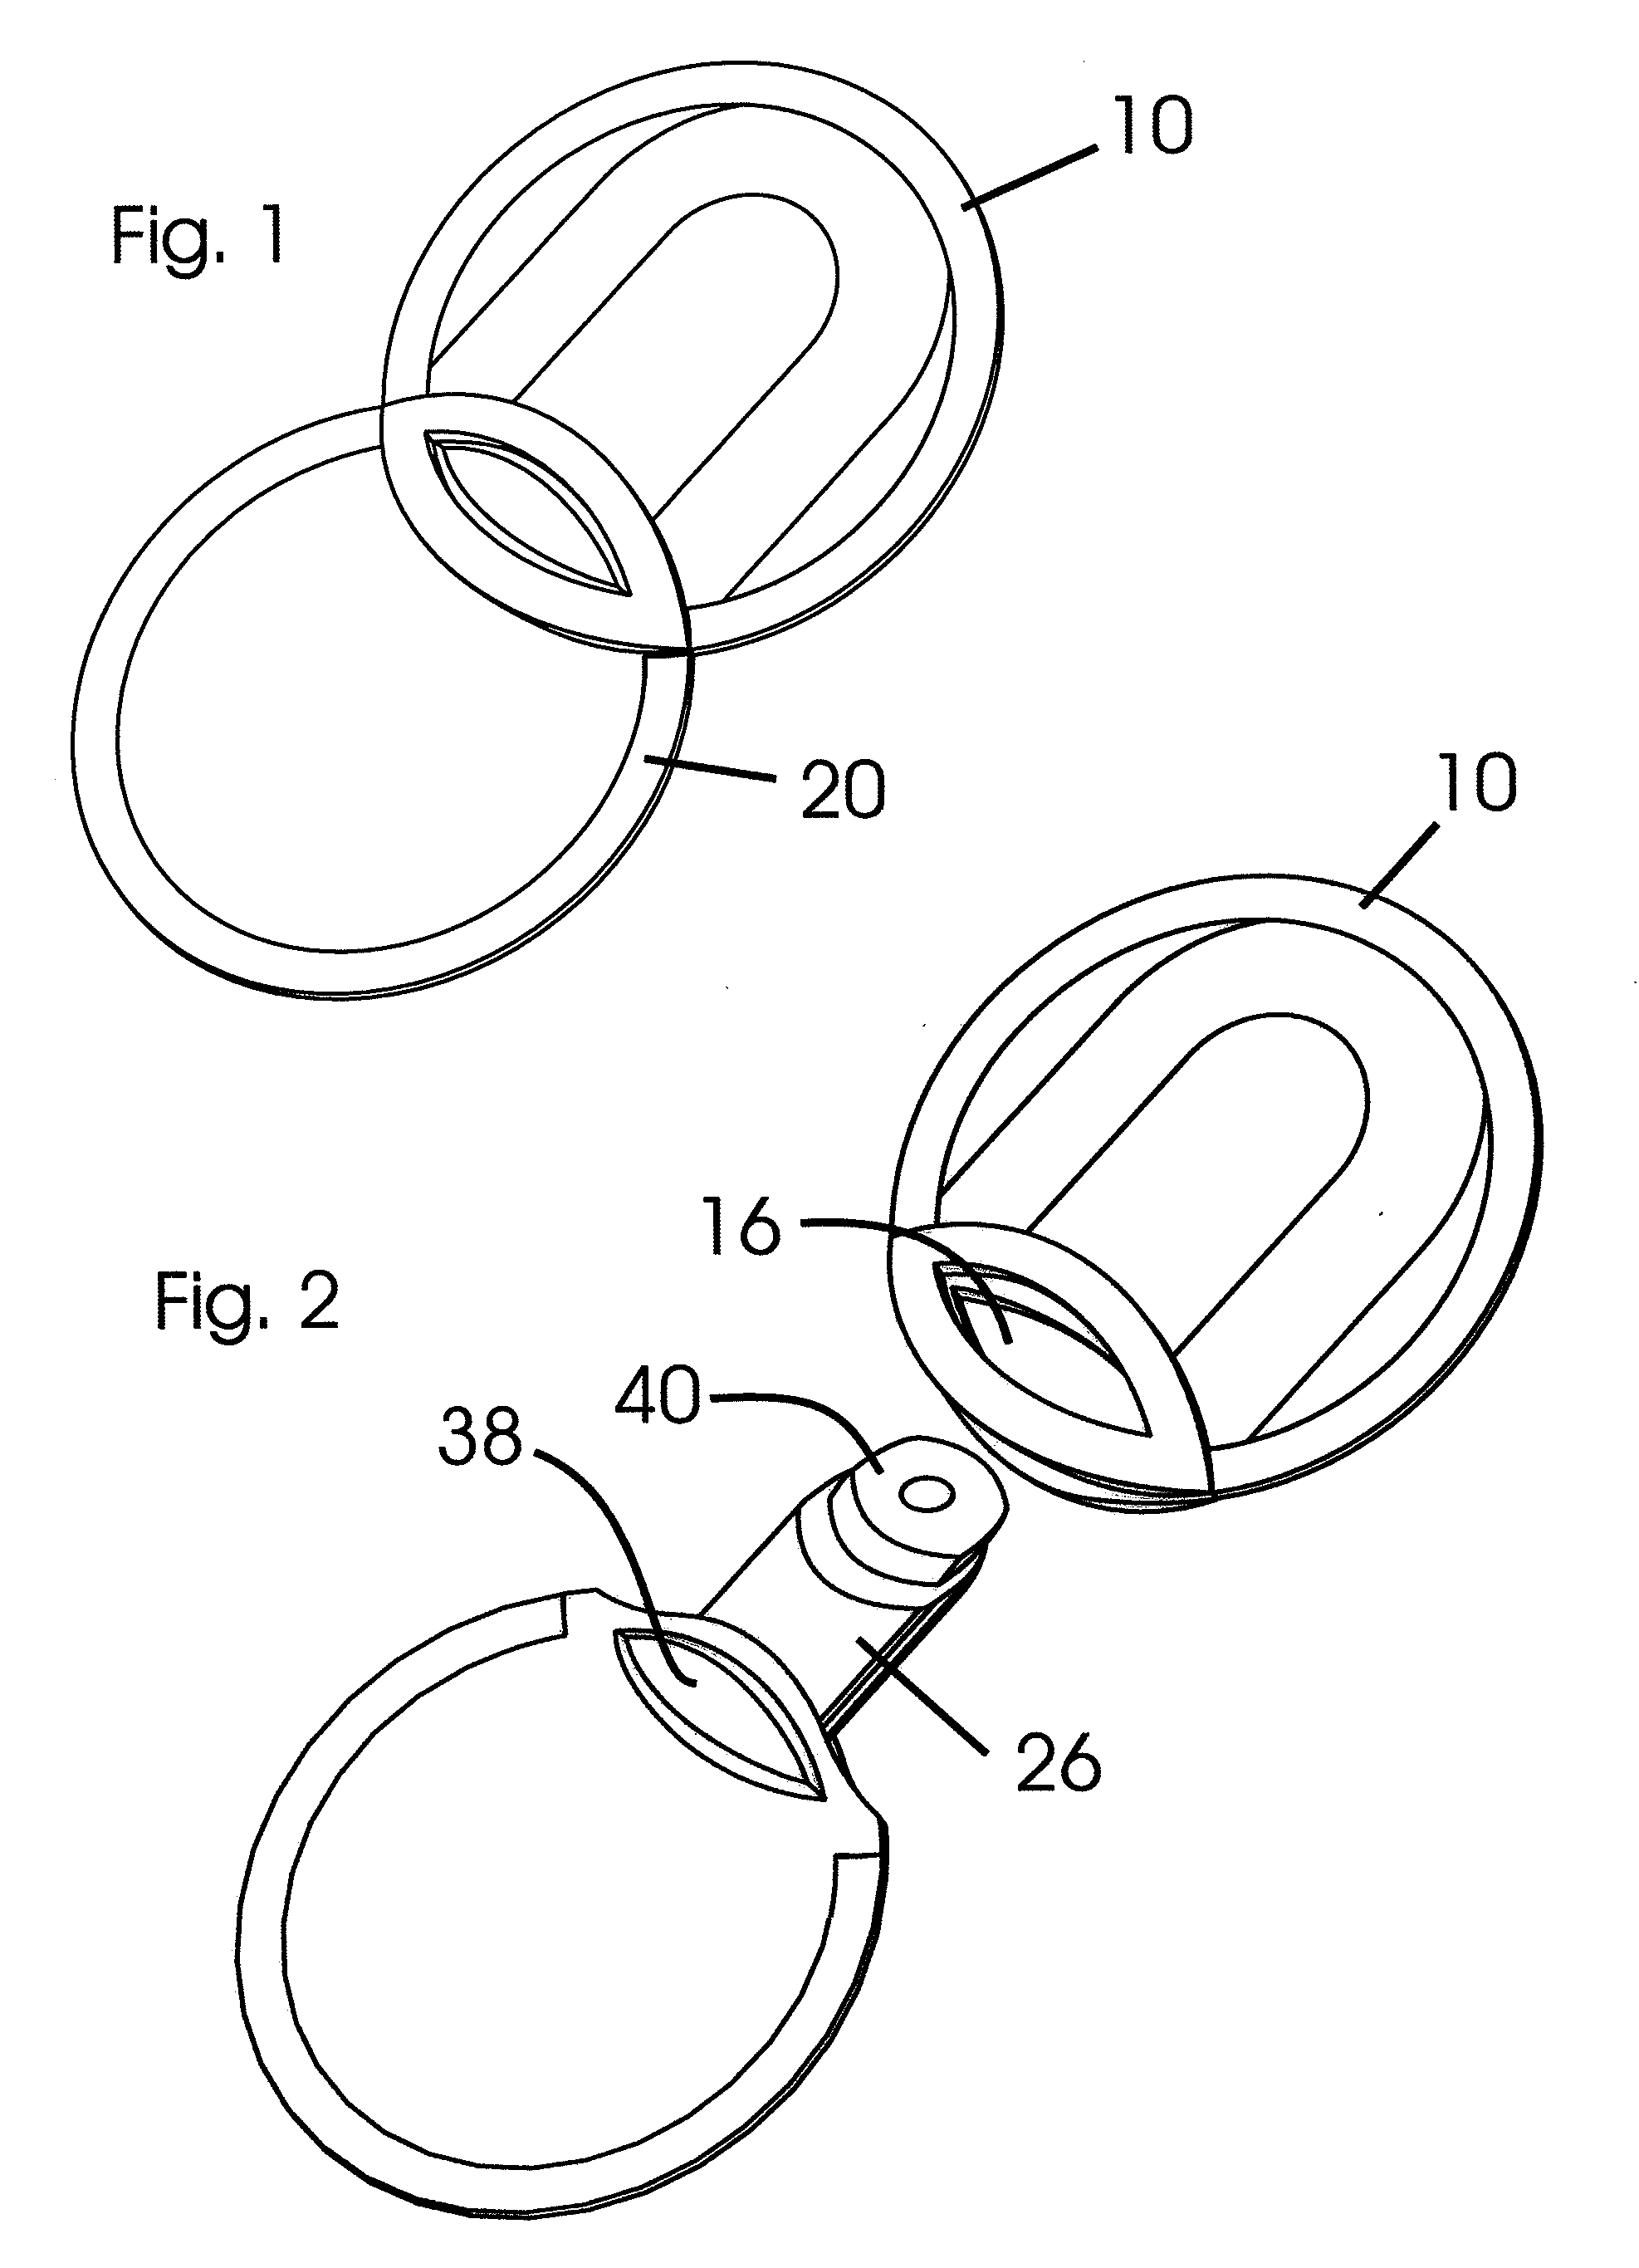 Dispenser and applicator that bring reactive substances into contact with each other at time of use